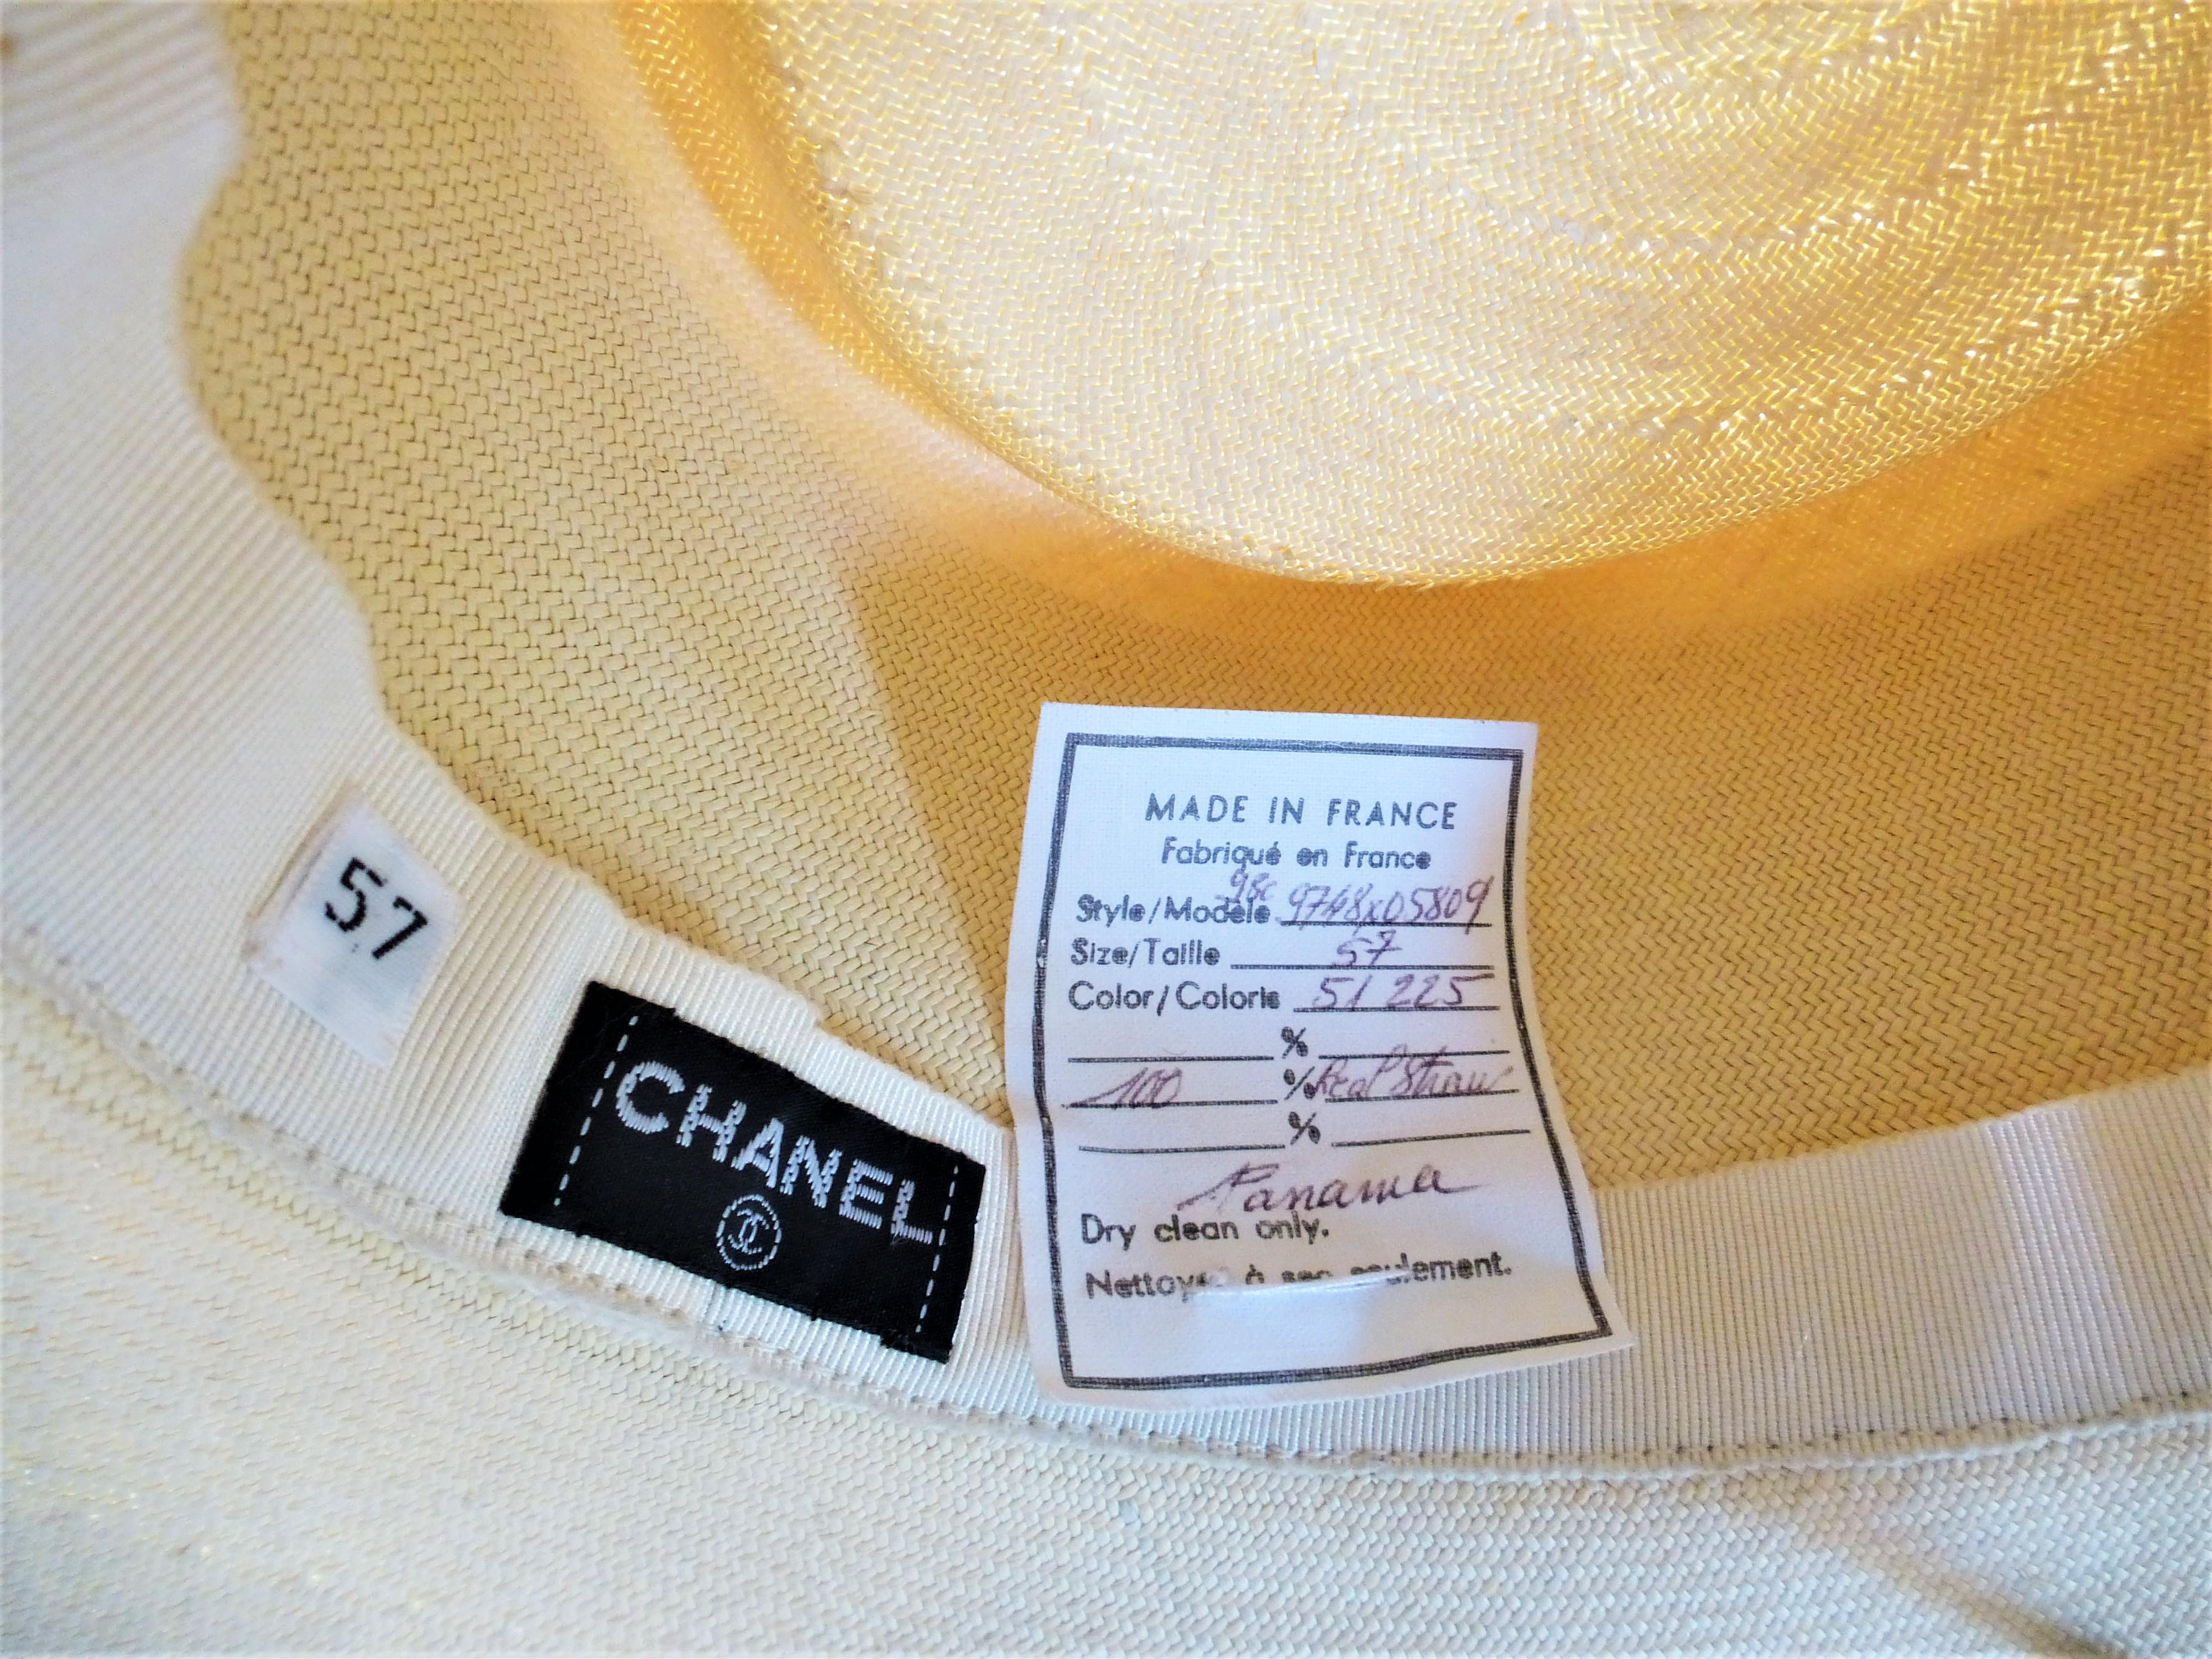 CHANEL PANAMA STRAWHAT size 57 signed 1994 For Sale 1